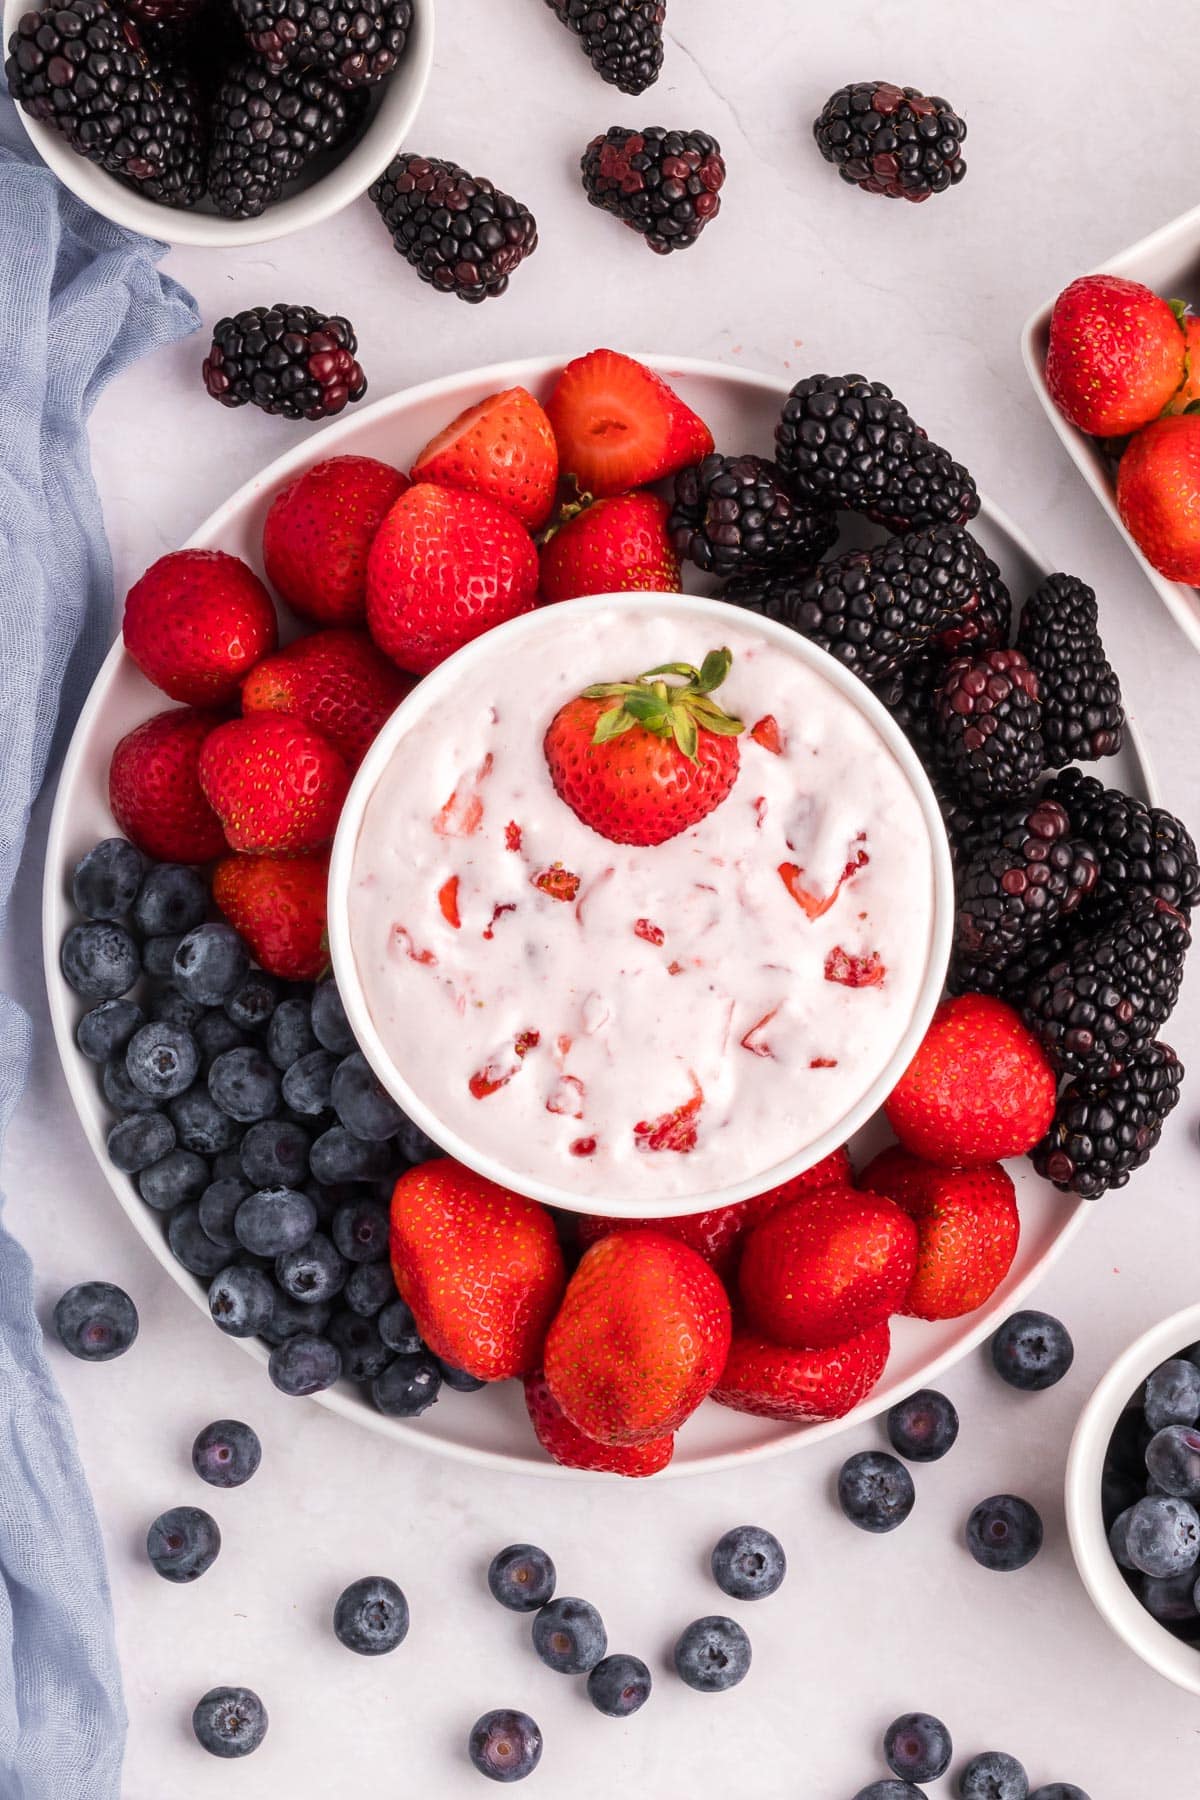 A plate of cream cheese fruit dip with strawberry pieces and a full strawberry in the dip surrounded by a platter of fresh berries.